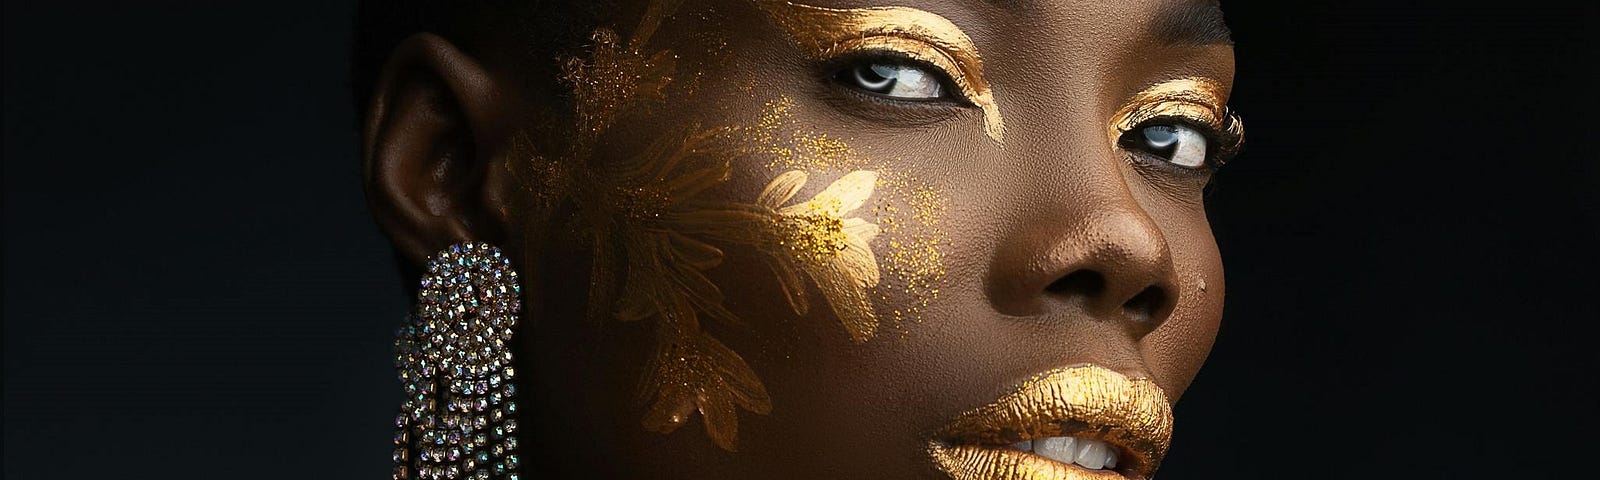 A woman of African descent stares at the camera in a close-up shot, there are flowers painted on the right-side of her face in gold makeup, and her eyeshadow and lips are colored gold. She’s wearing a neck bangle and long, silver earrings.